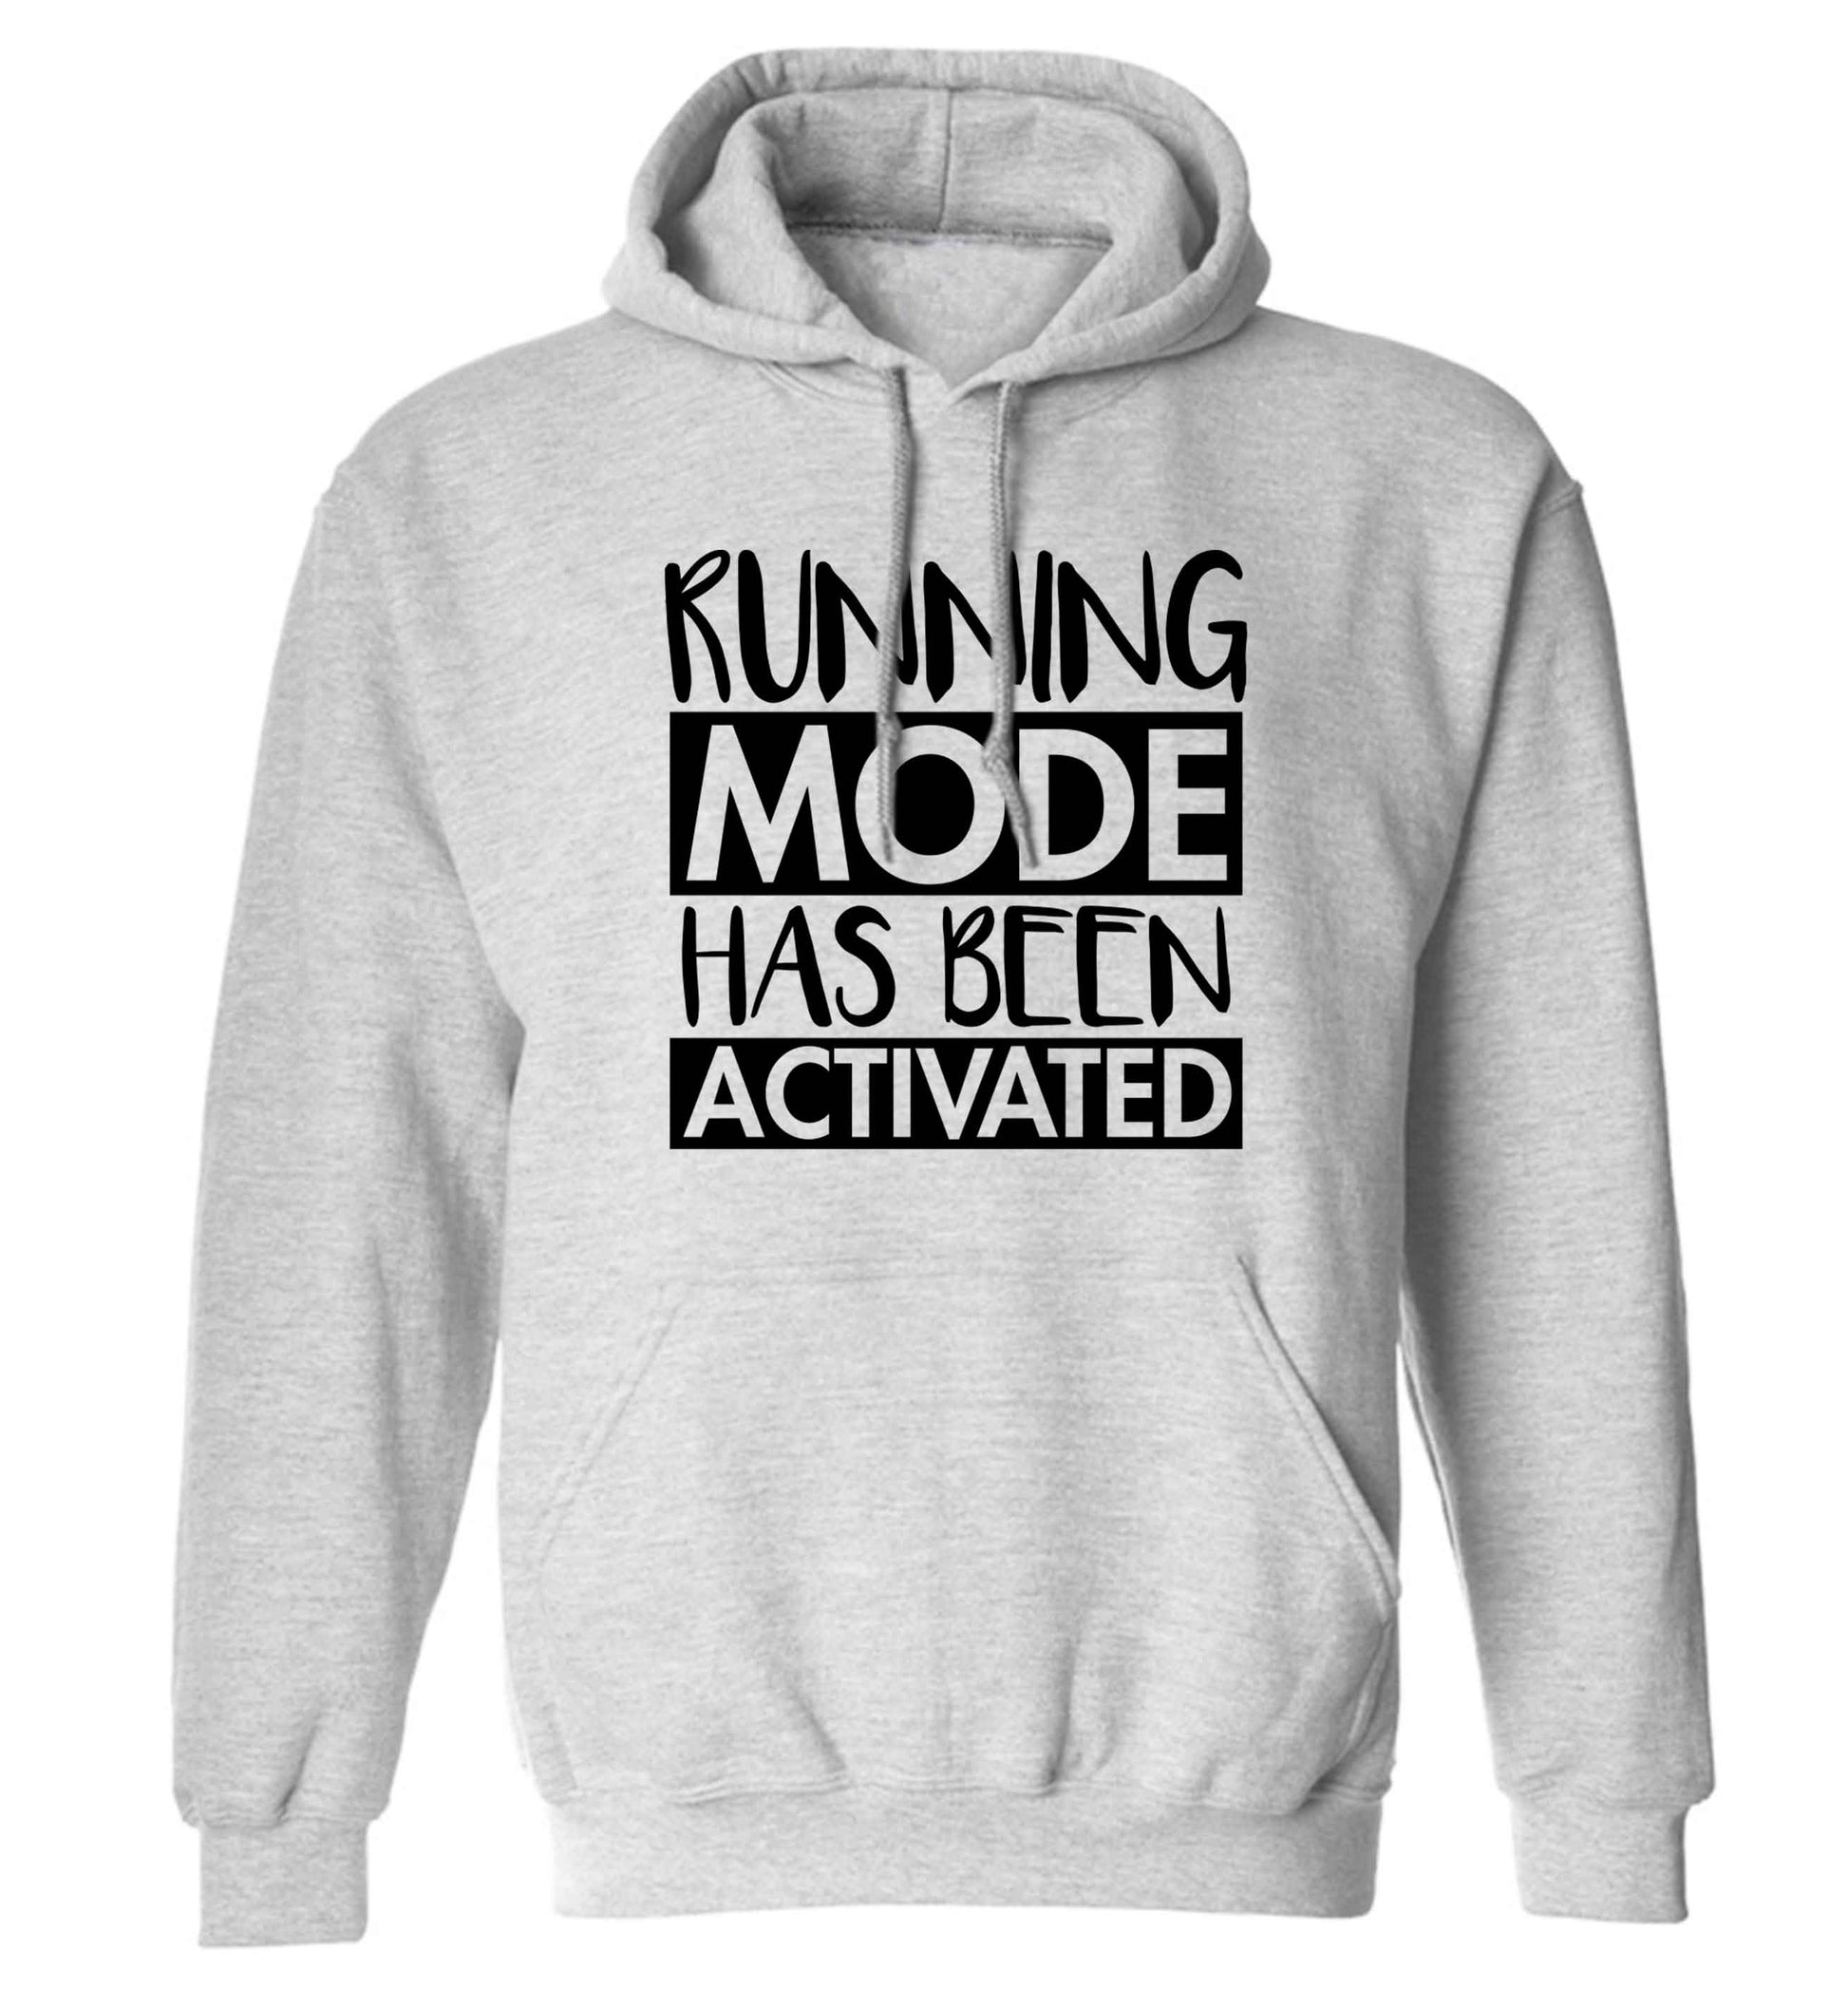 Running mode has been activated adults unisex grey hoodie 2XL